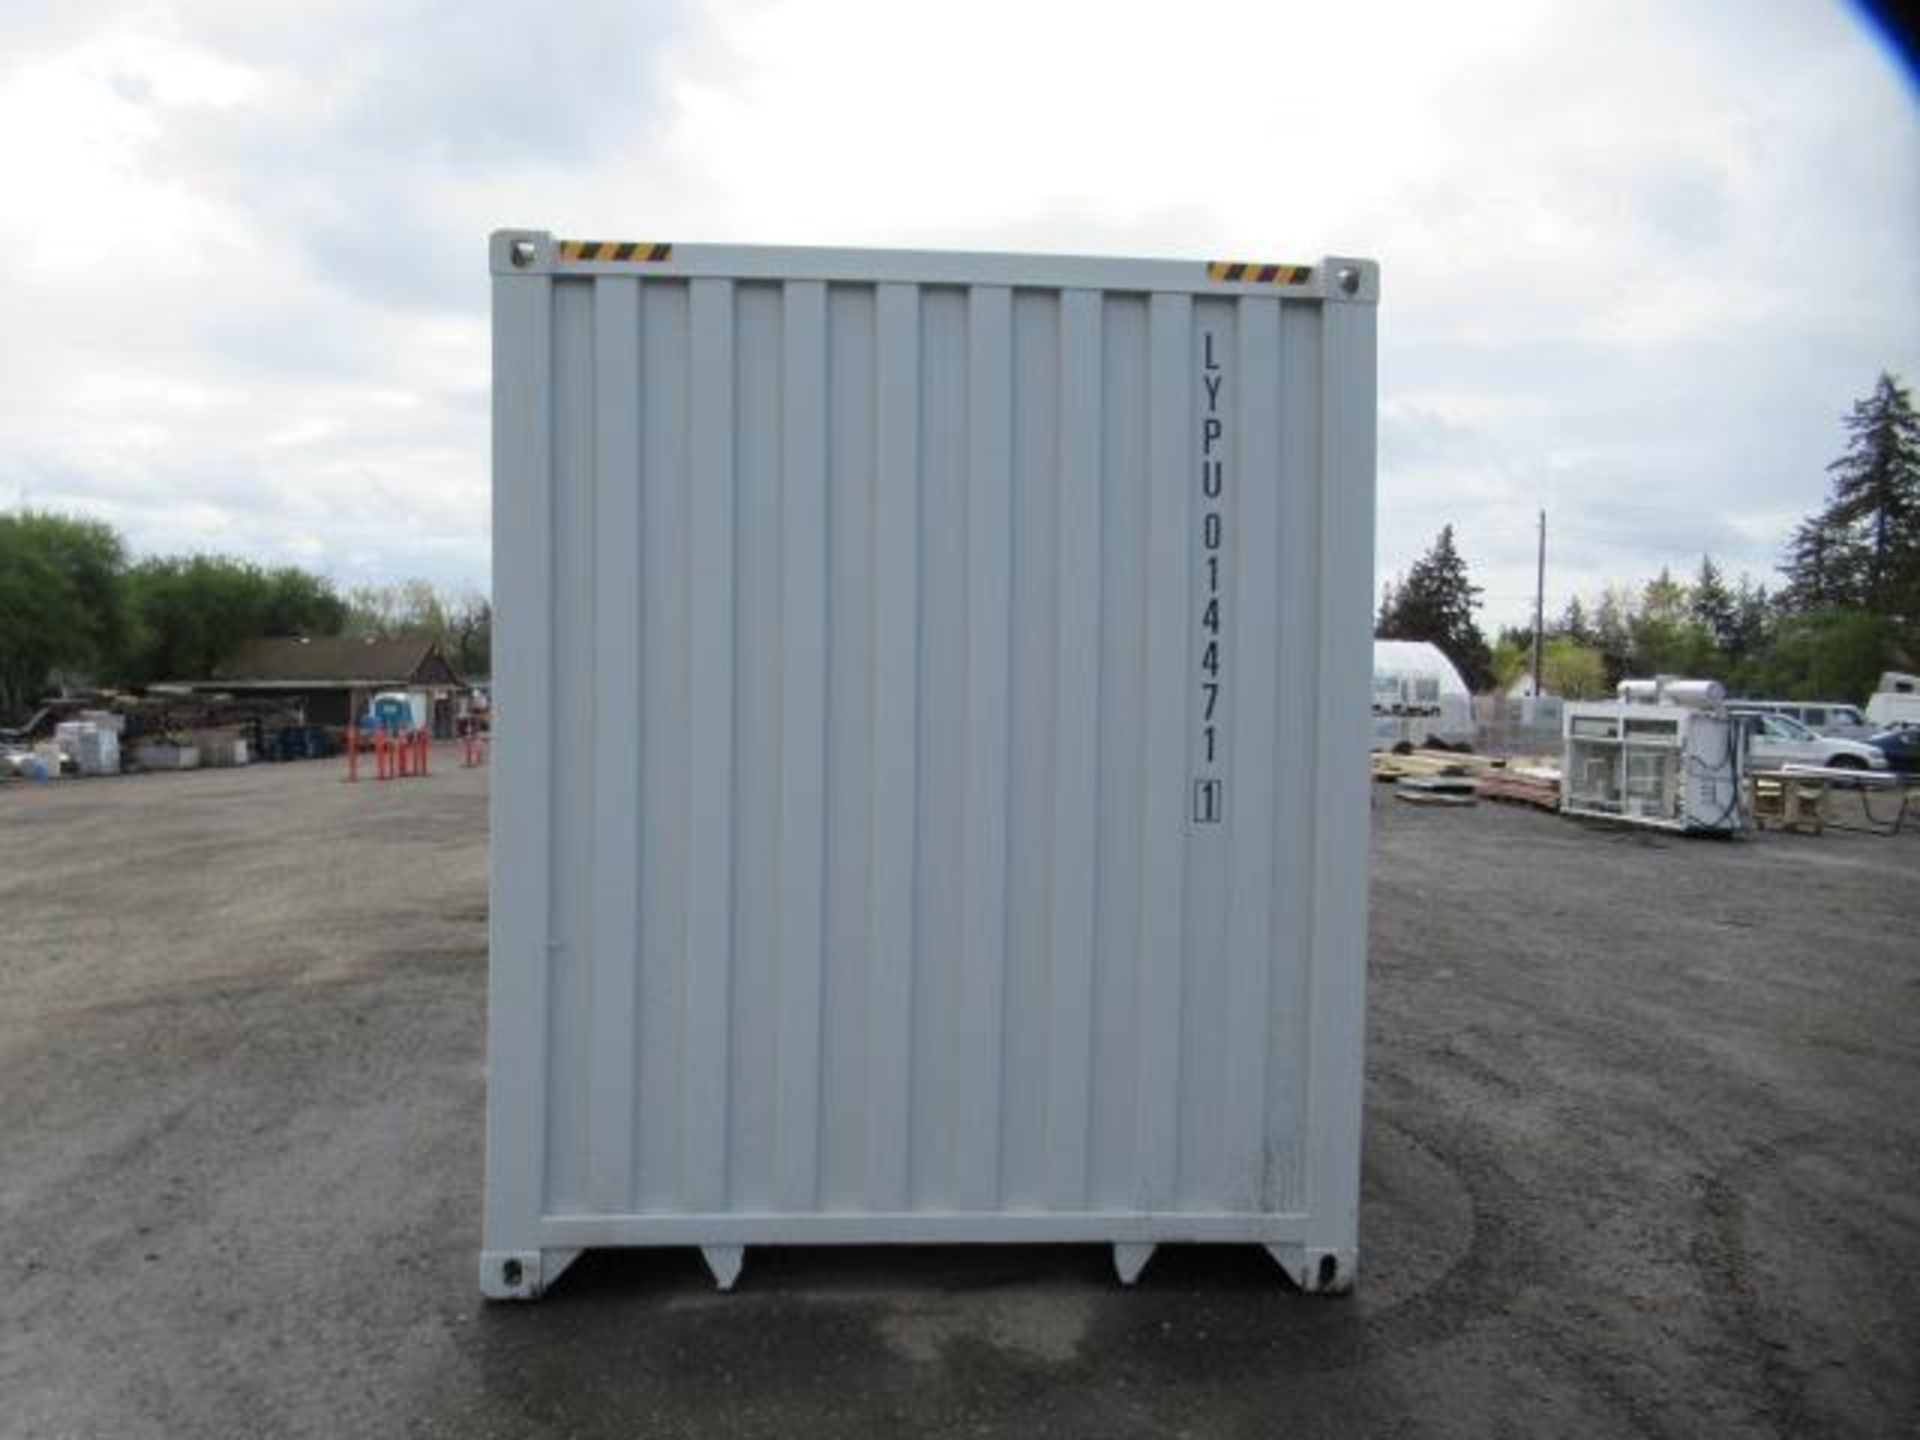 2024 40' HIGH CUBE SHIPPING CONTAINER W/ (2) SIDE DOORS, SER#: LYPU0144711 (UNUSED) - Image 2 of 6